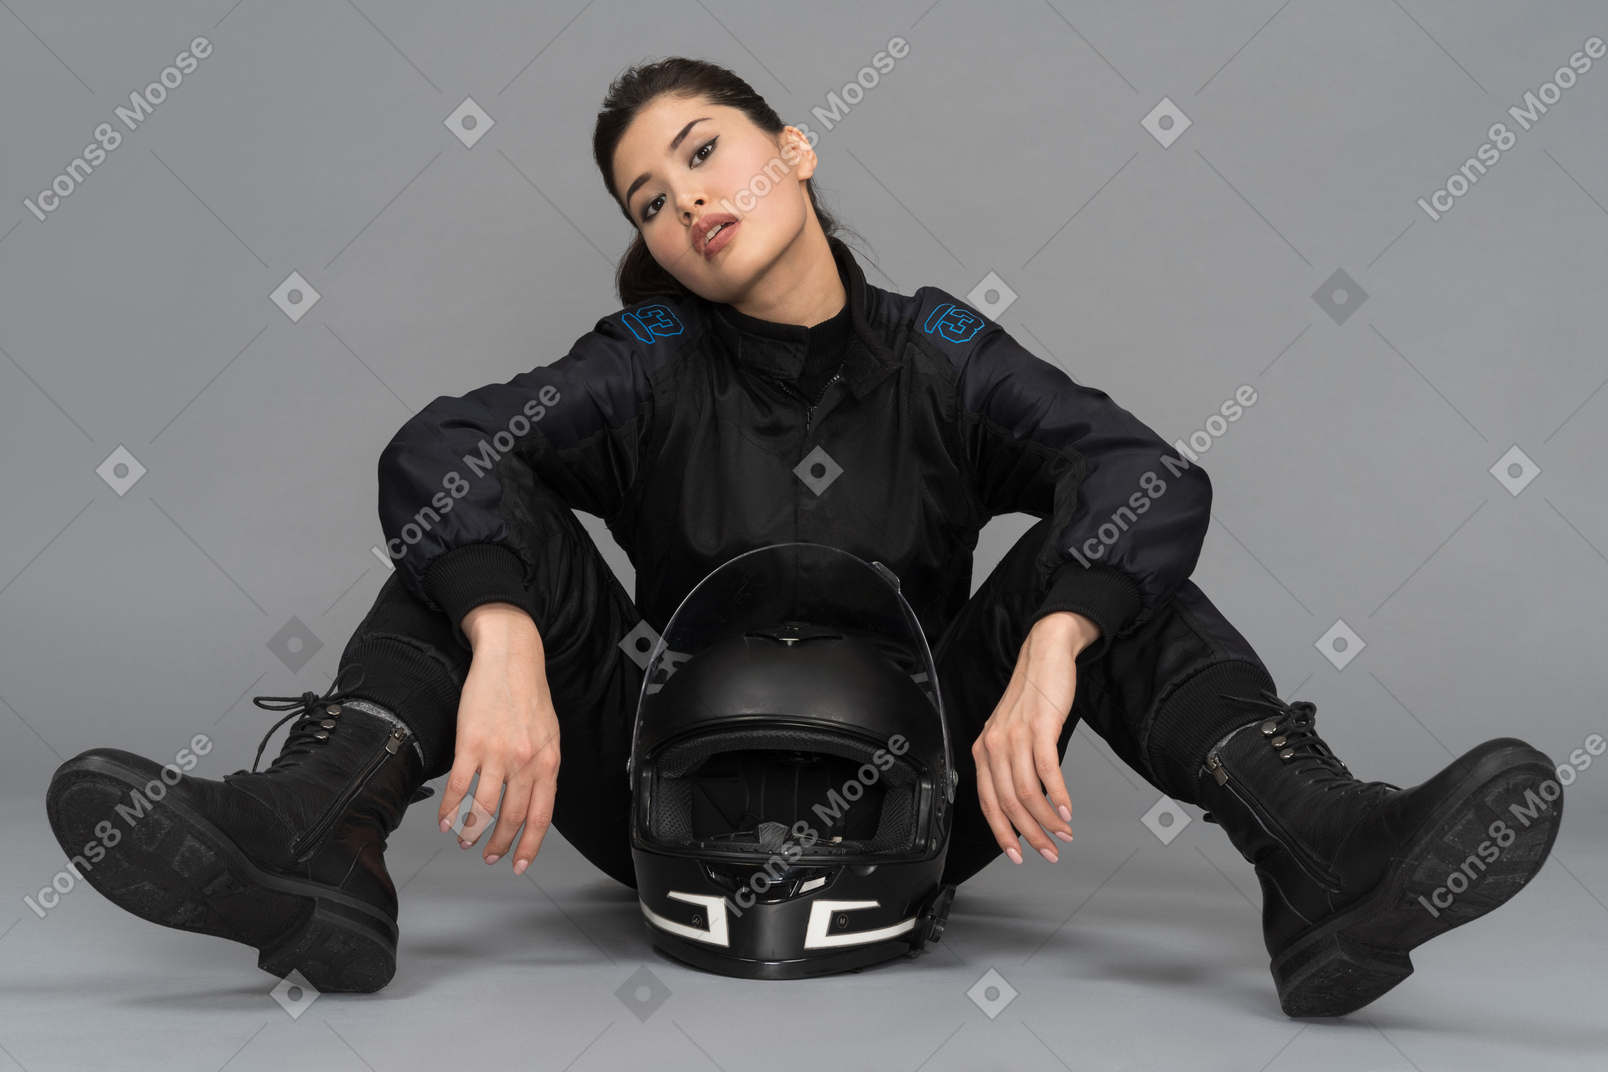 A self-confident young woman sitting with a helmet between her legs